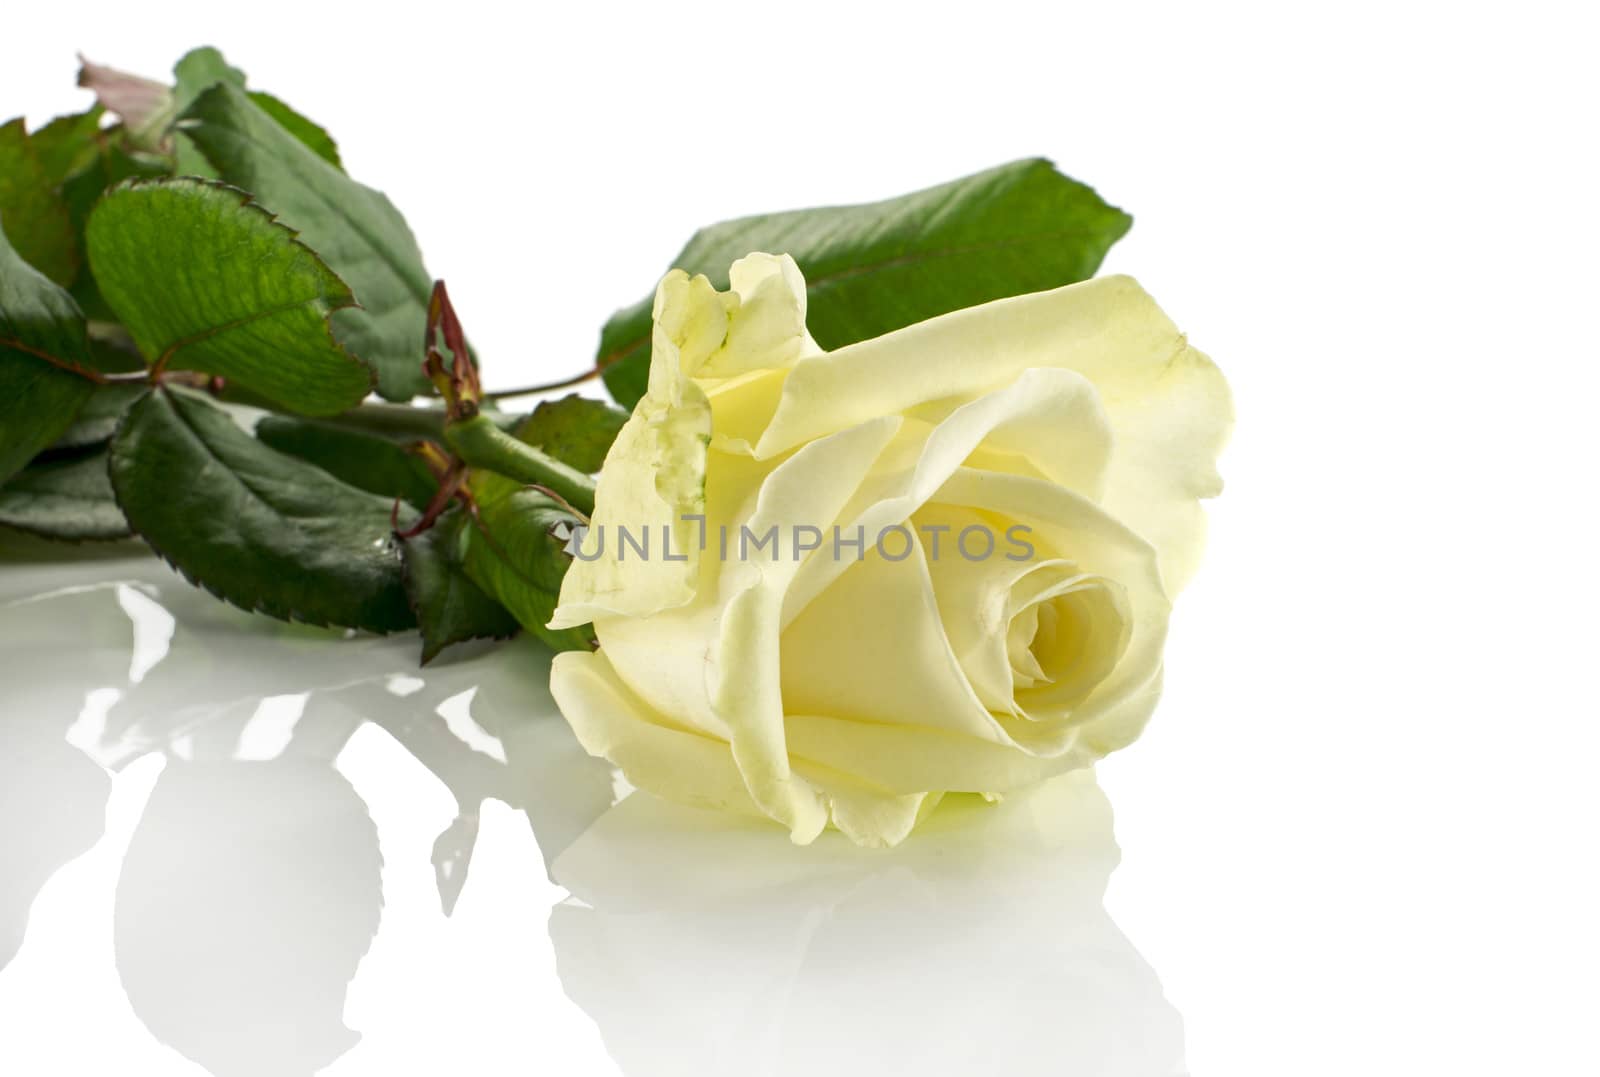 white rose and green leaves isolate on white background